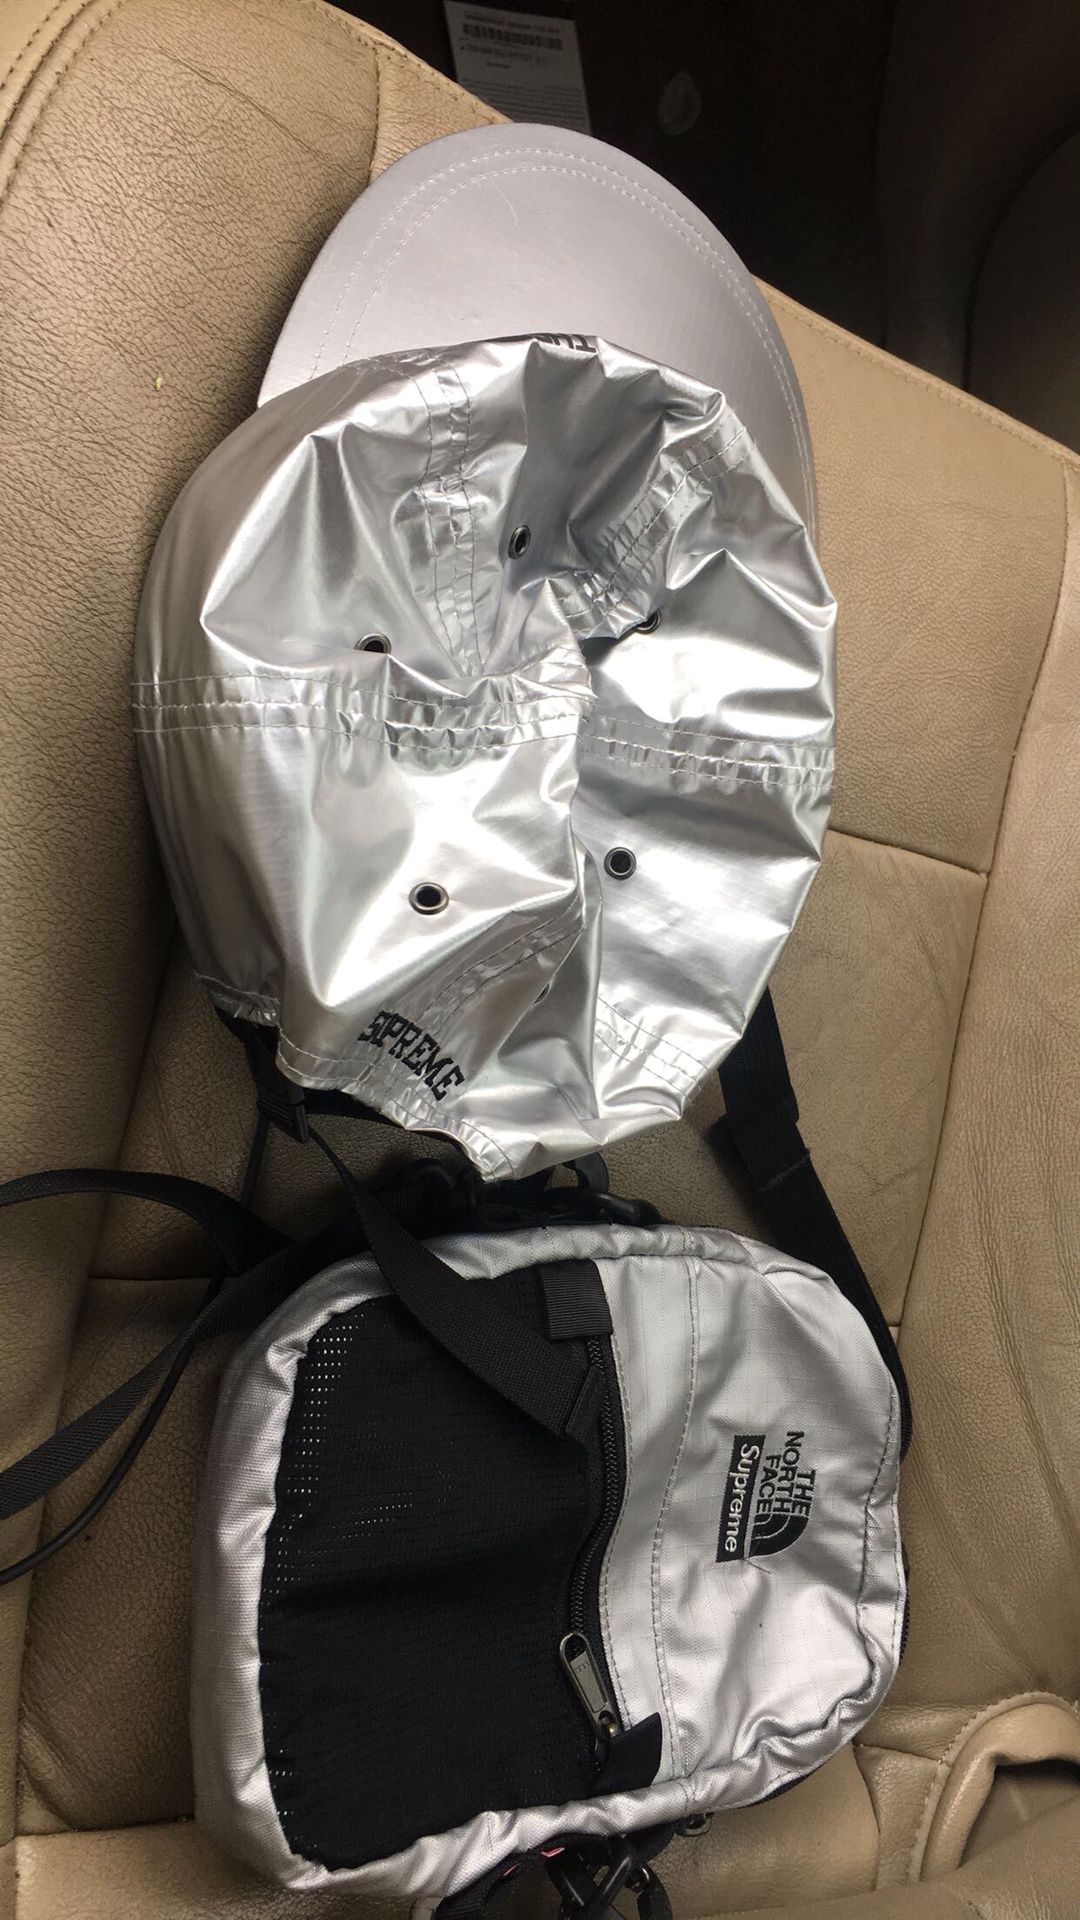 Supreme x The NorthFace Collaboration (VERY RARE) Bag Sold , Bidding the hat